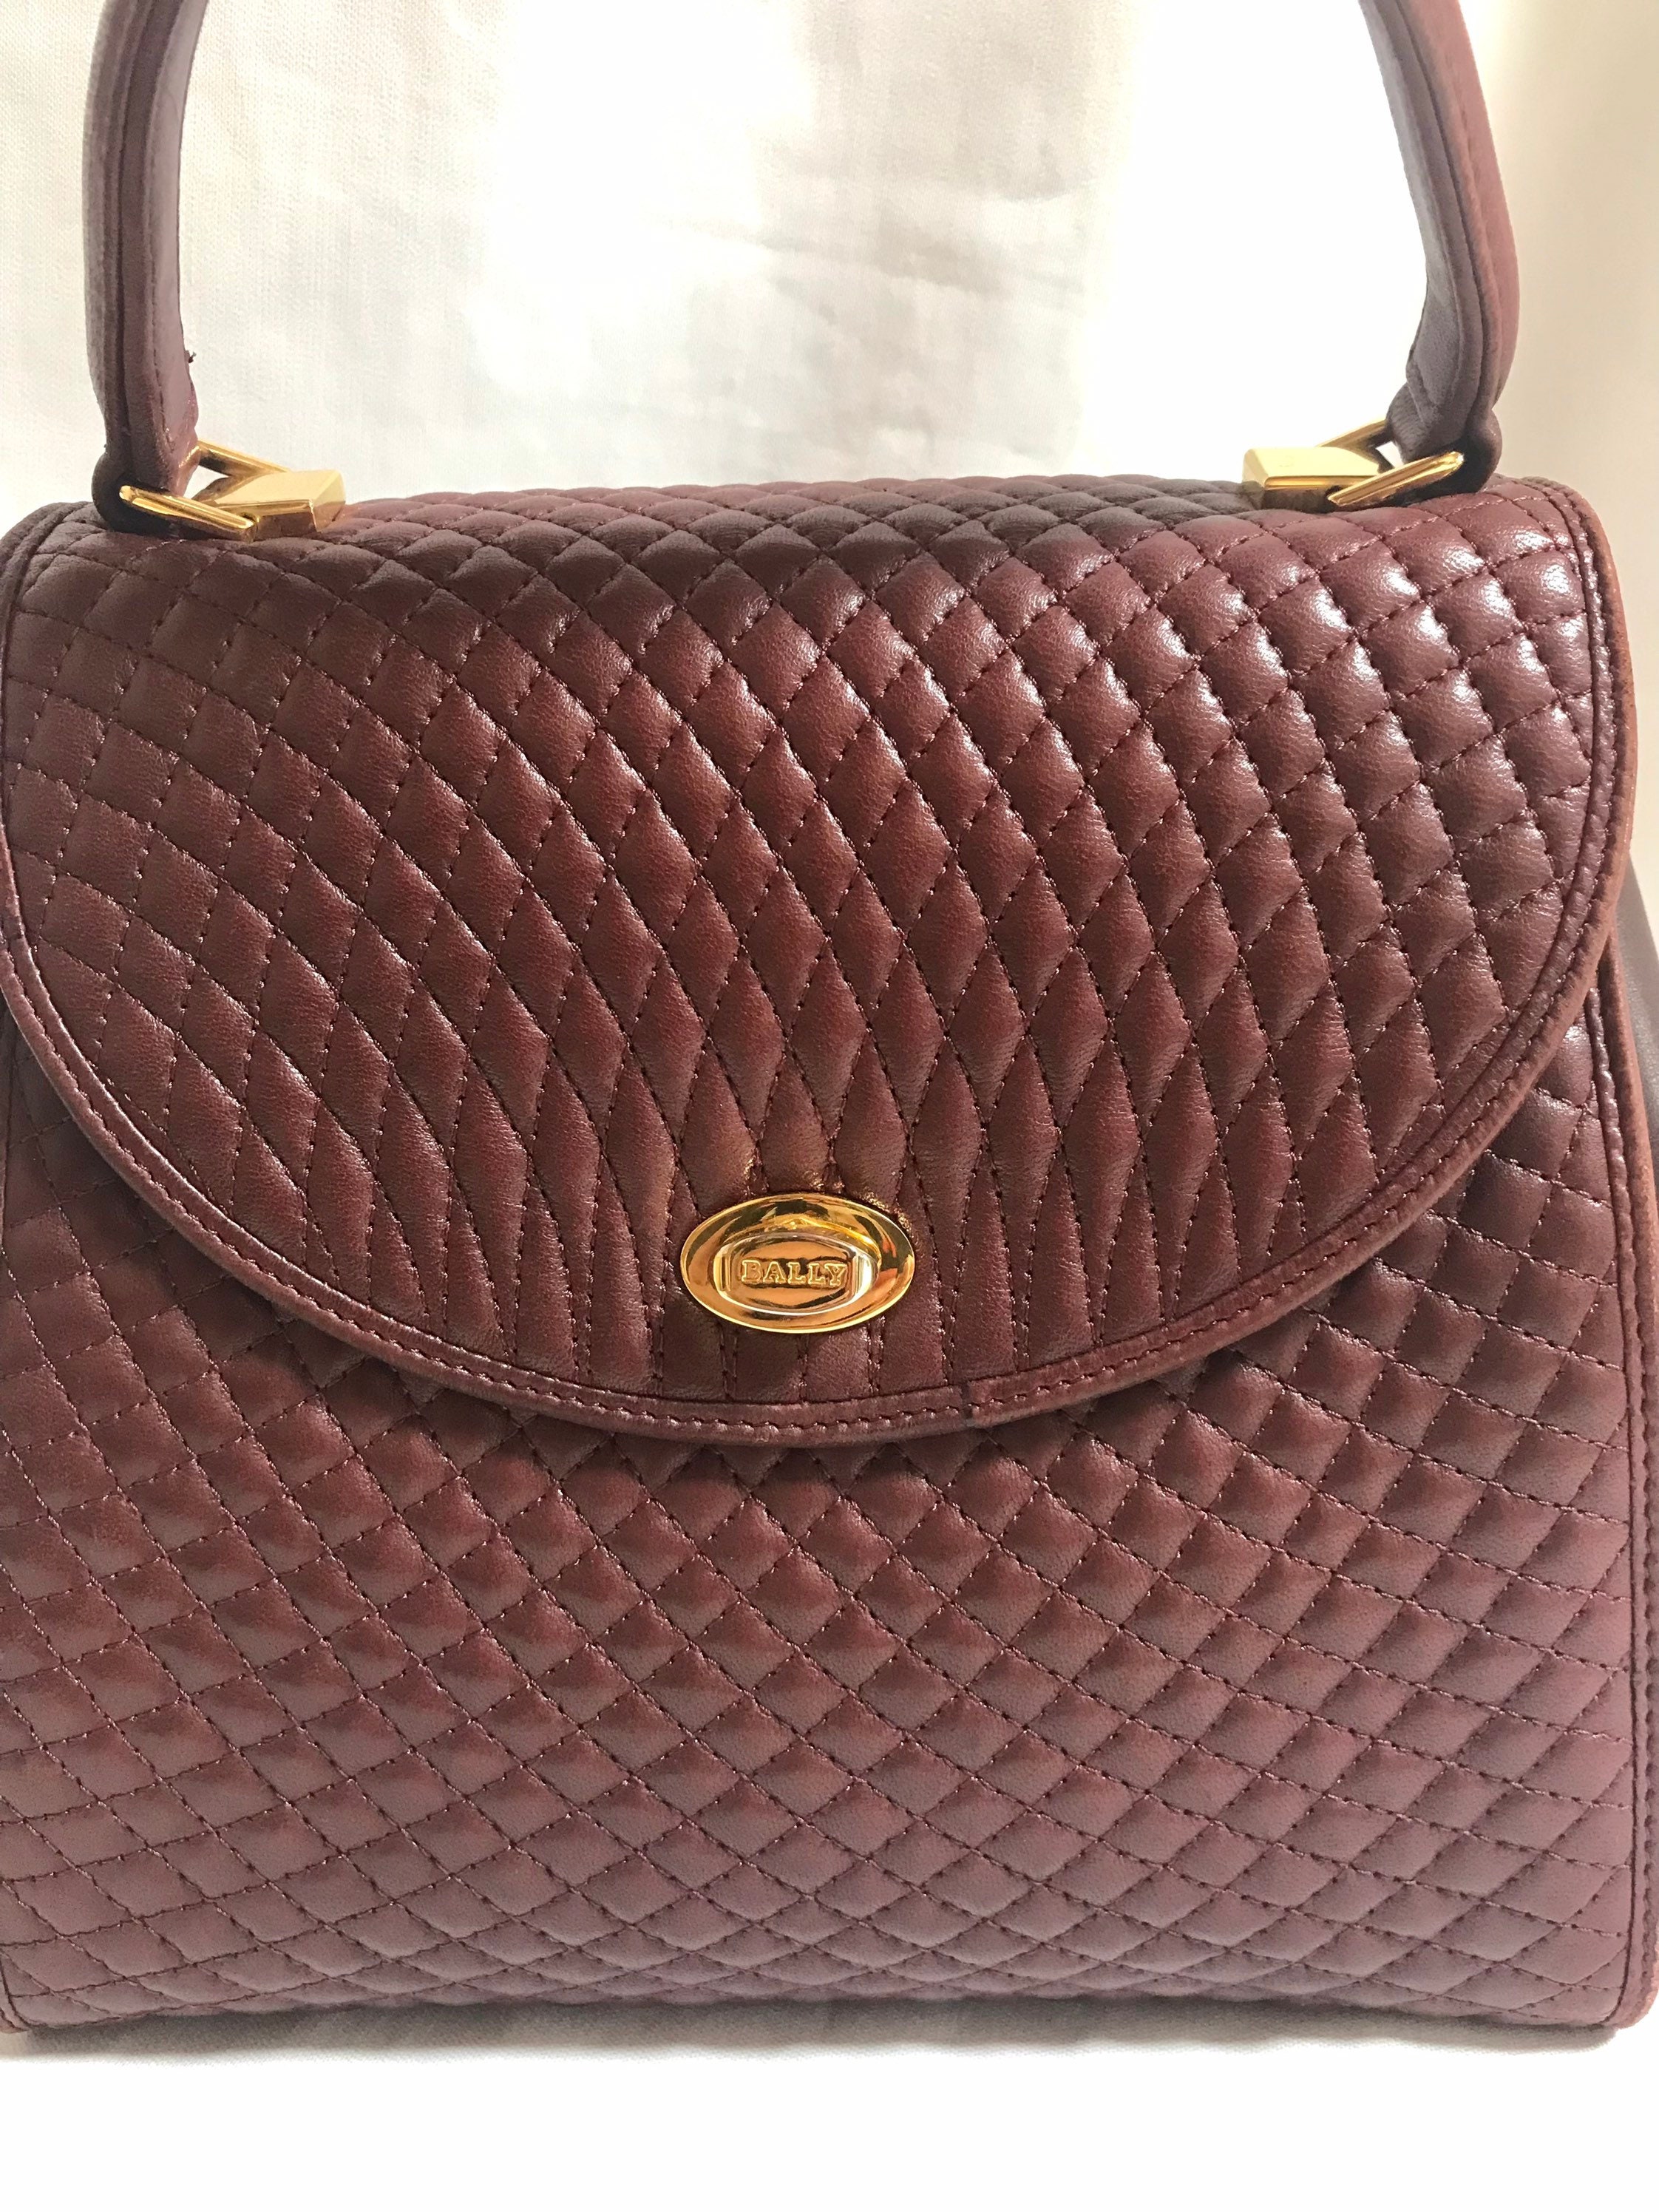 Vintage BALLY Wine Brown Quilted Lambskin Handbag With 